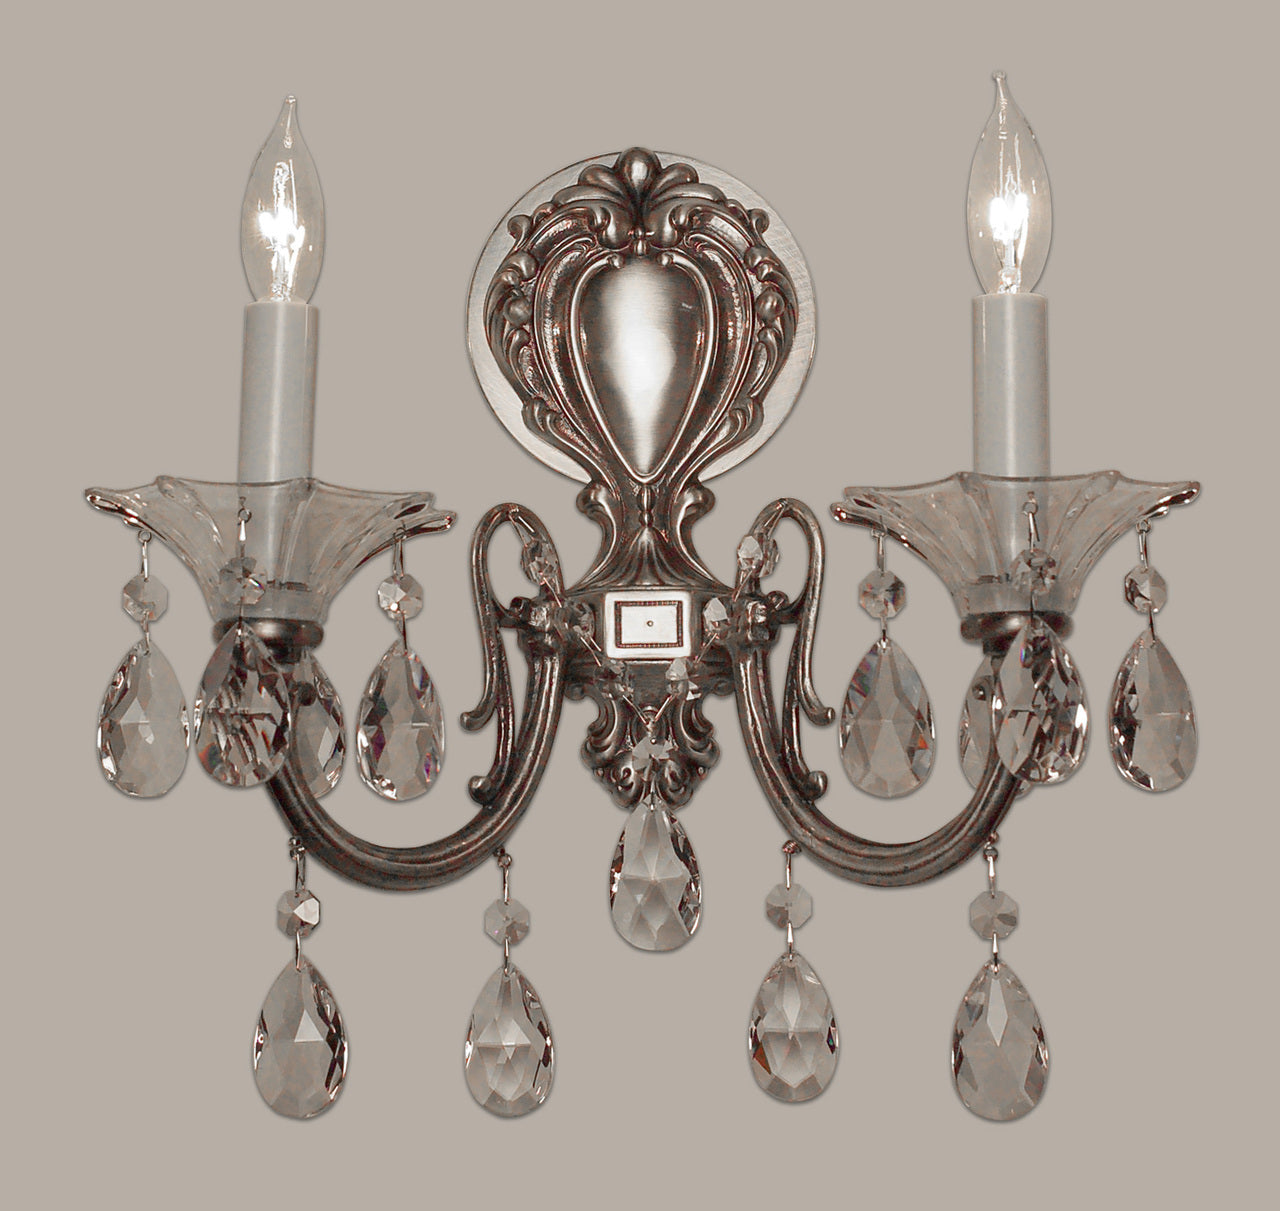 Classic Lighting 57052 RB CP Via Lombardi Crystal Wall Sconce in Roman Bronze (Imported from Spain)